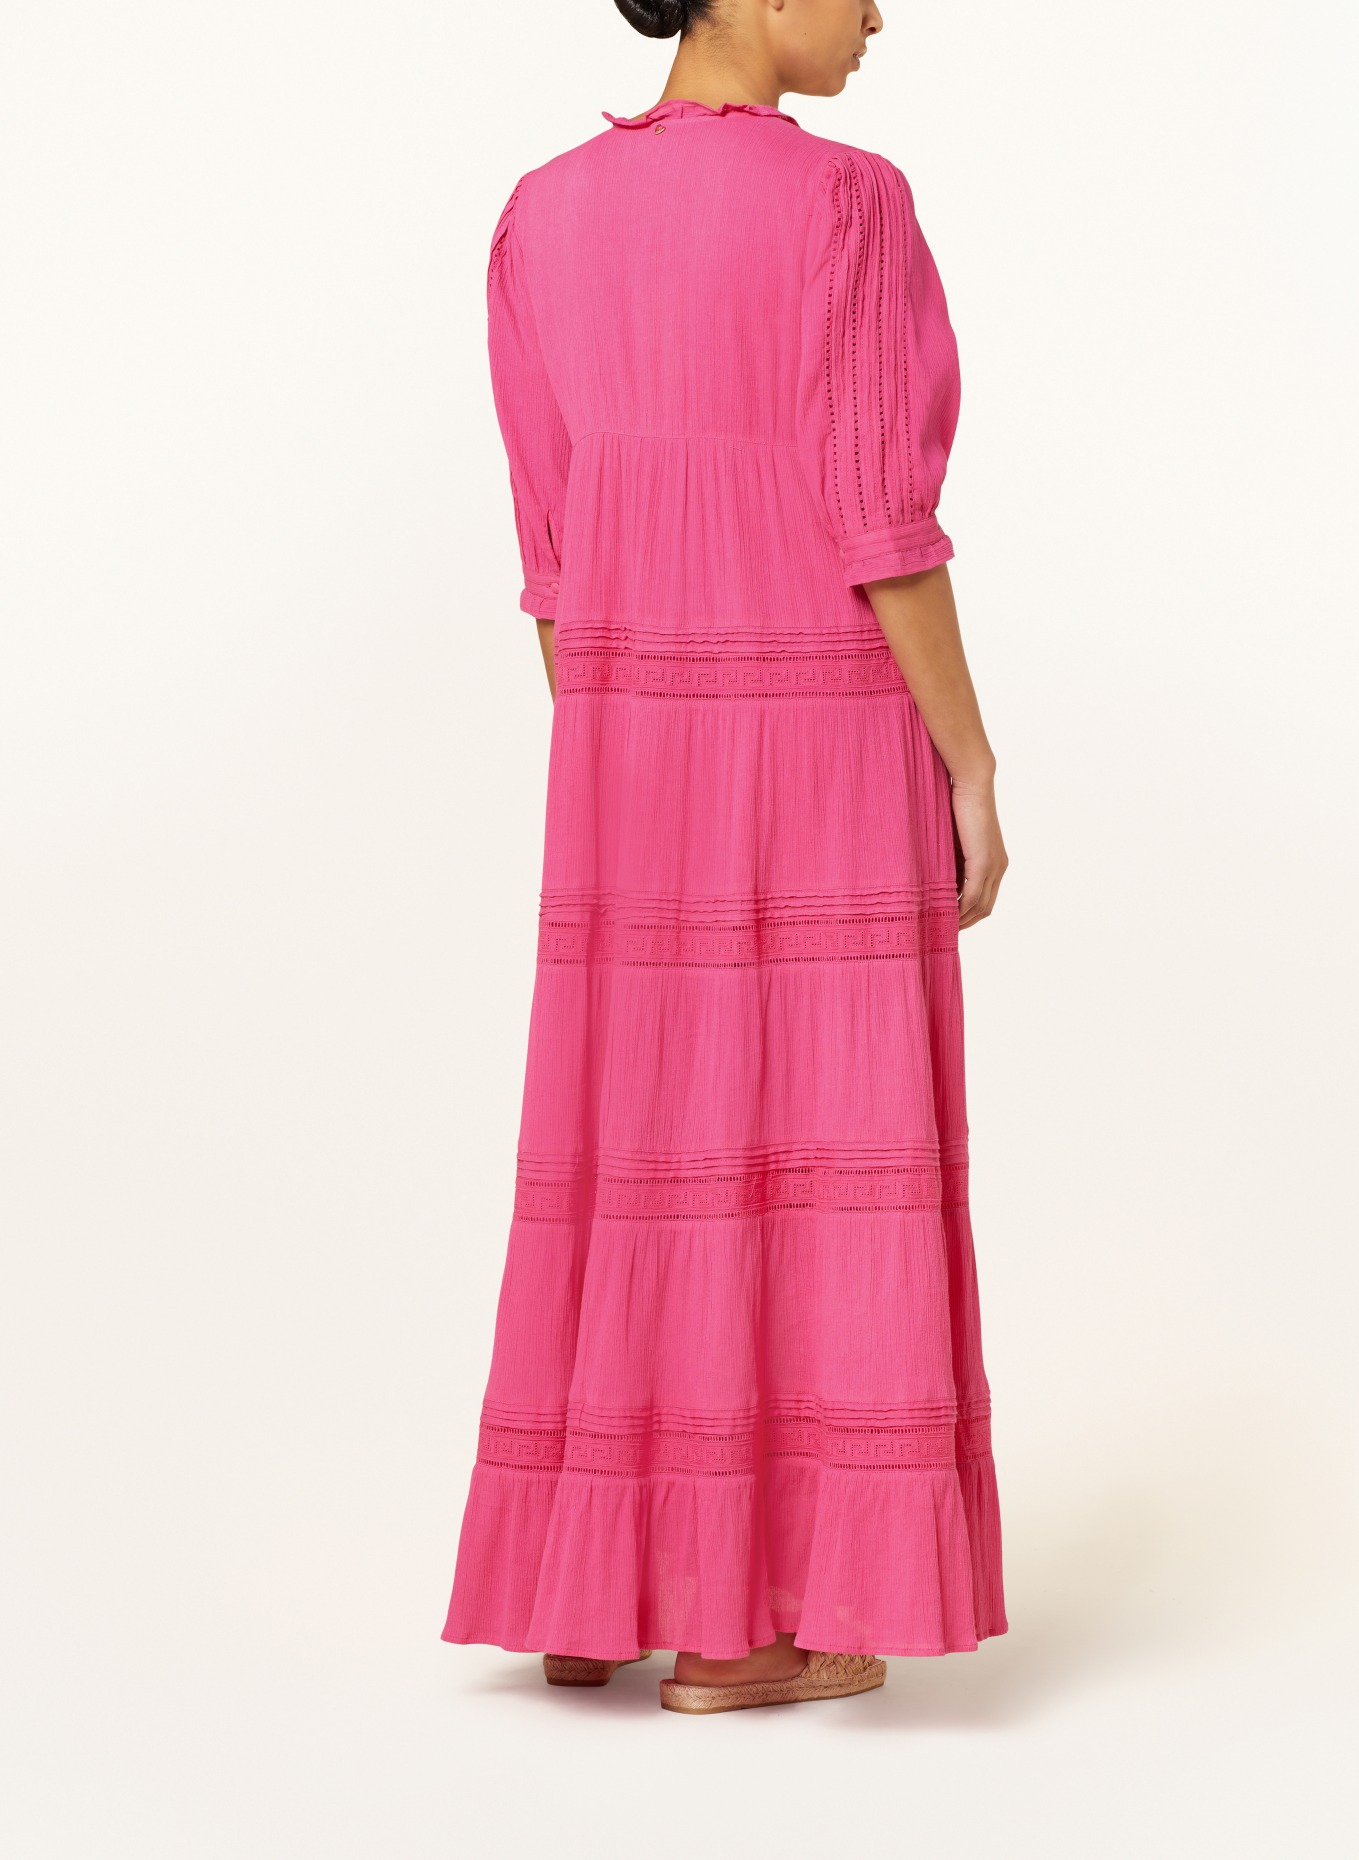 FABIENNE CHAPOT Dress KIRA with 3/4 sleeves, Color: PINK (Image 3)